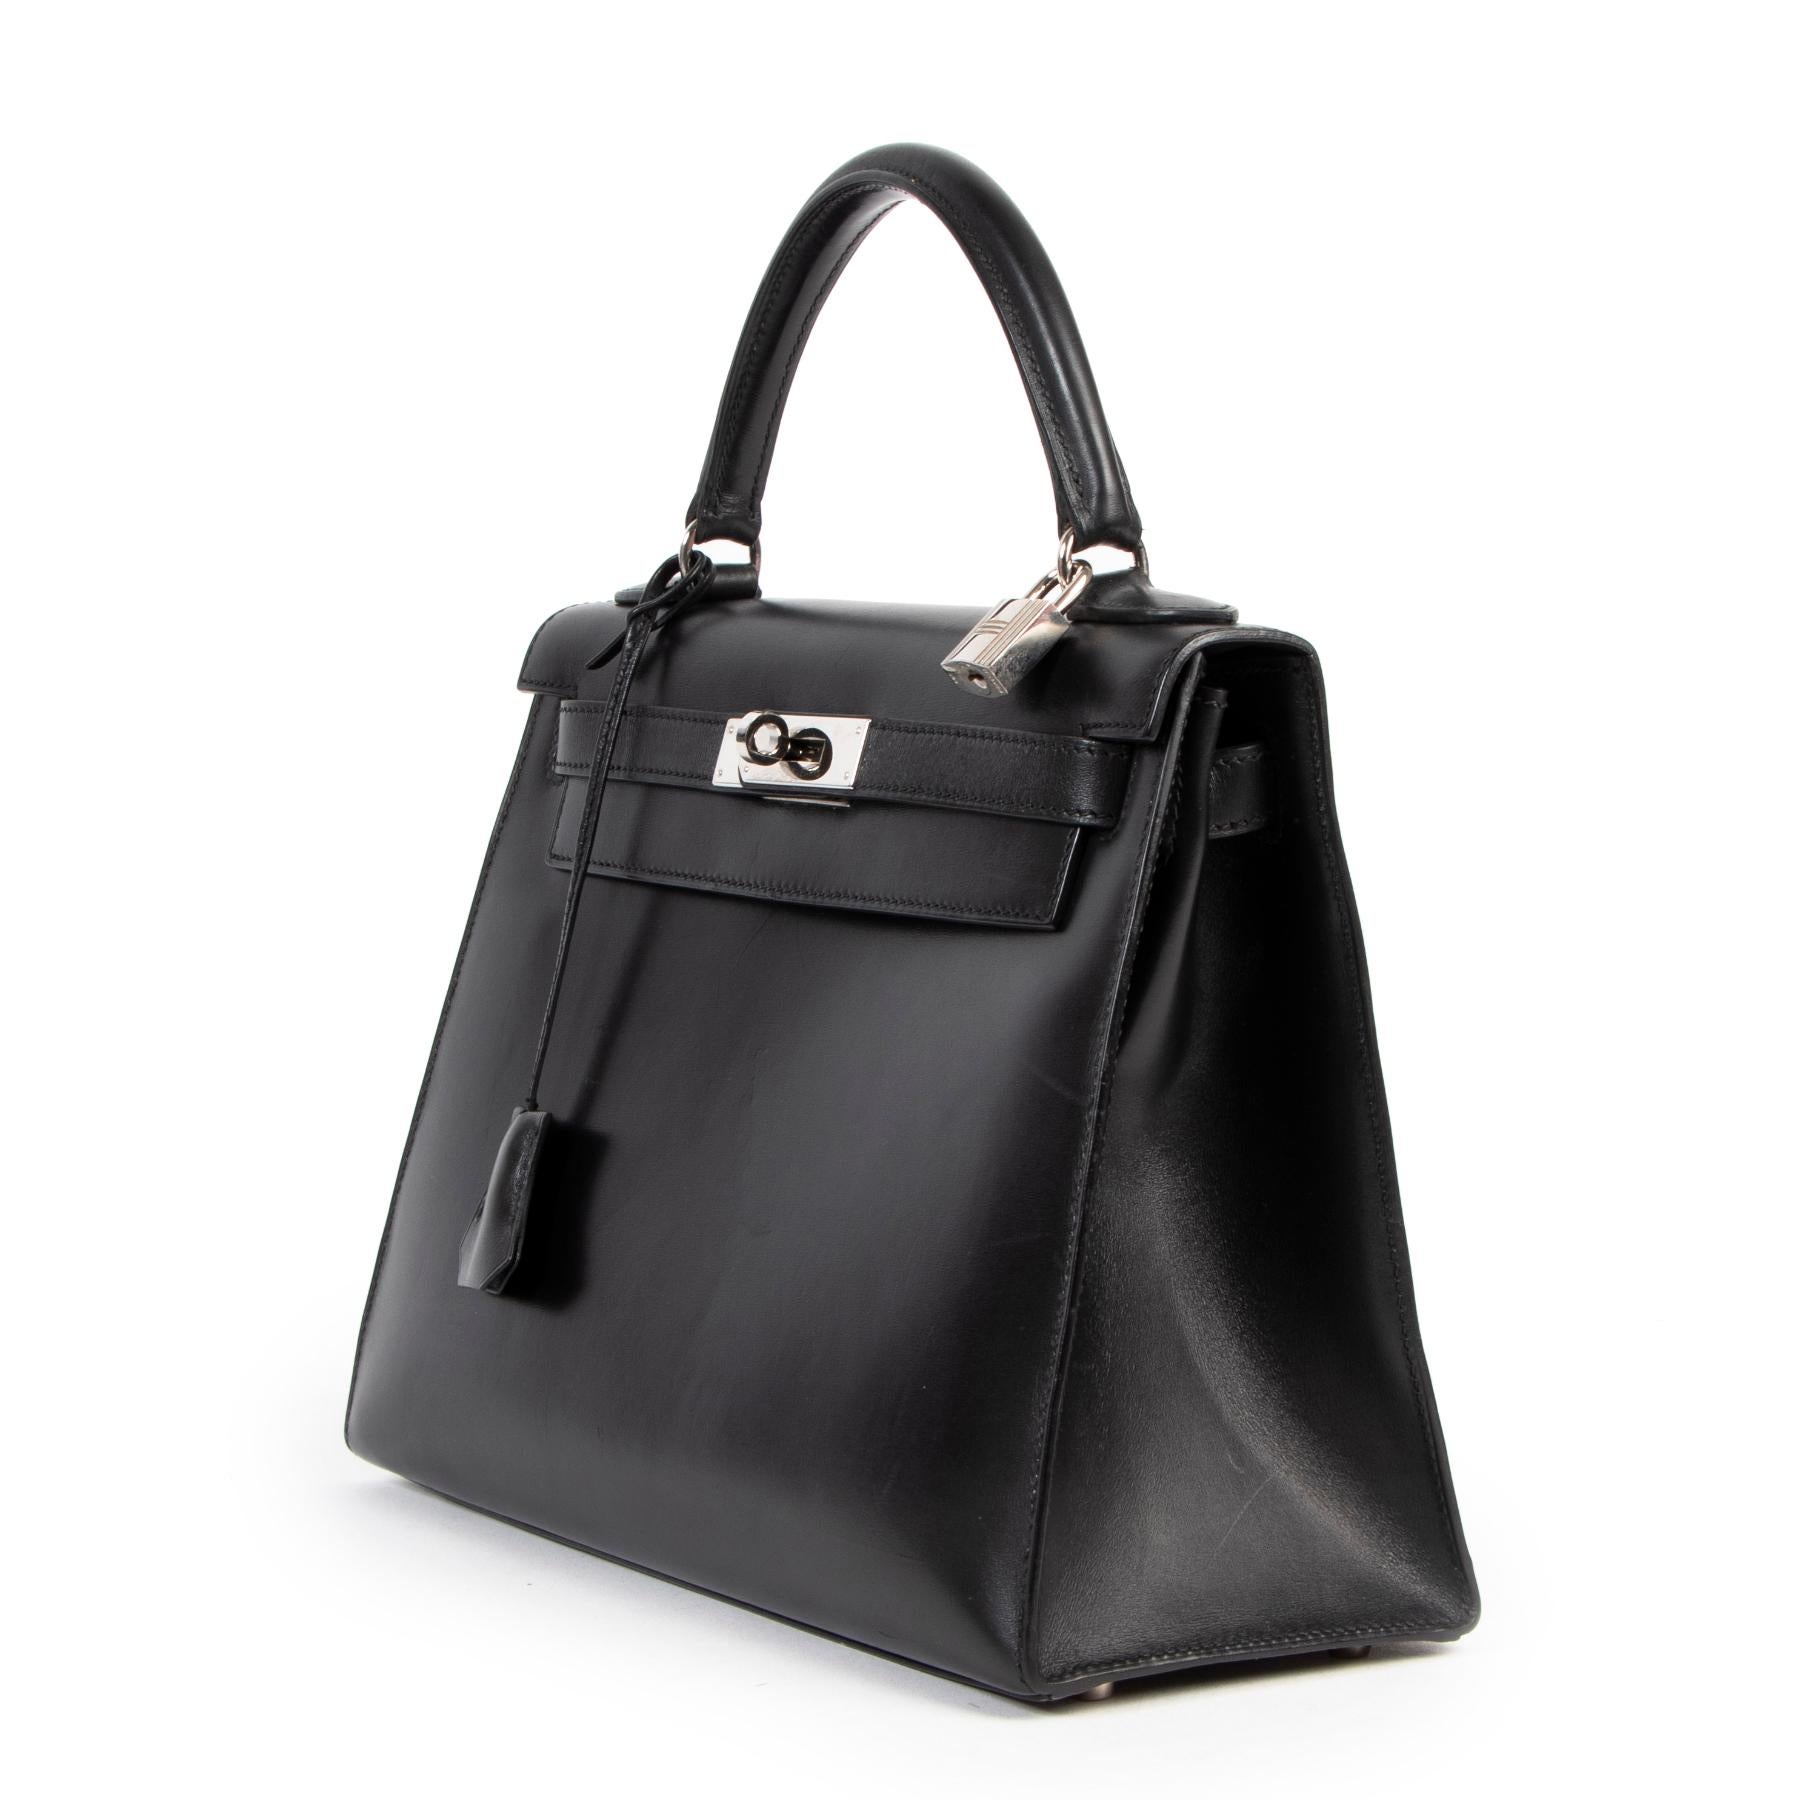 Excellent condition

Hermes Kelly 28 Black Boxcalf + Strap

The most sought after, impossible to find, and collectible bag ever made !
This beautiful Hermes Kelly 28 in Black Box calf leather.
Created in the size 28, the most desired size for a